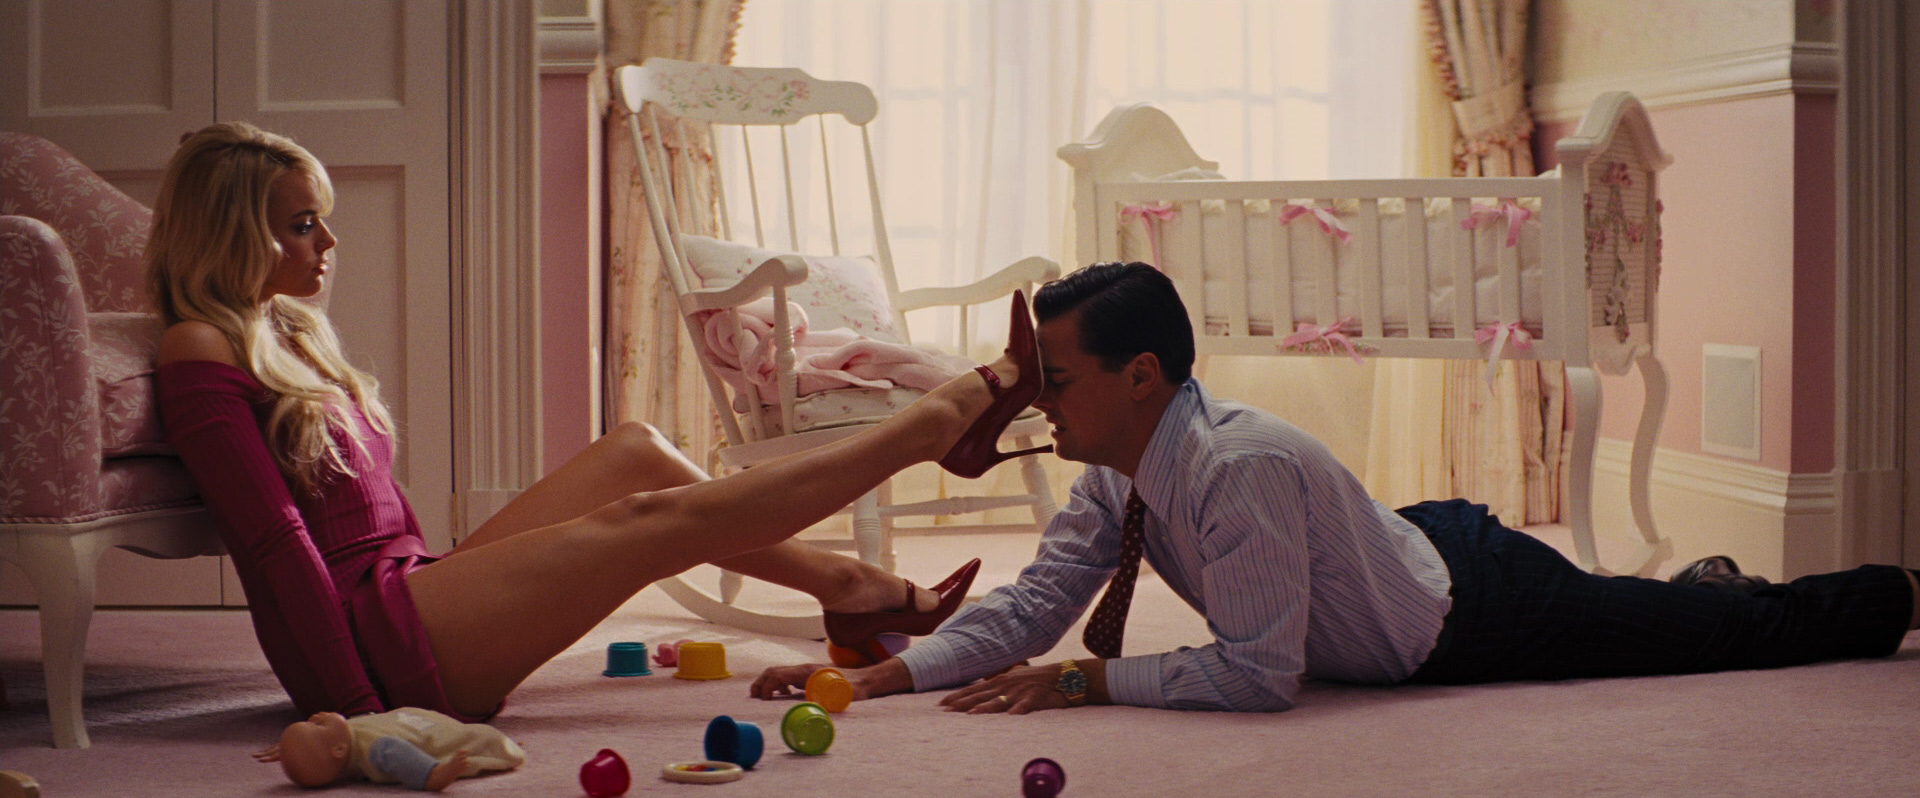 Margot Robbie, Naomi, pink dress in The Wolf of Wall Street